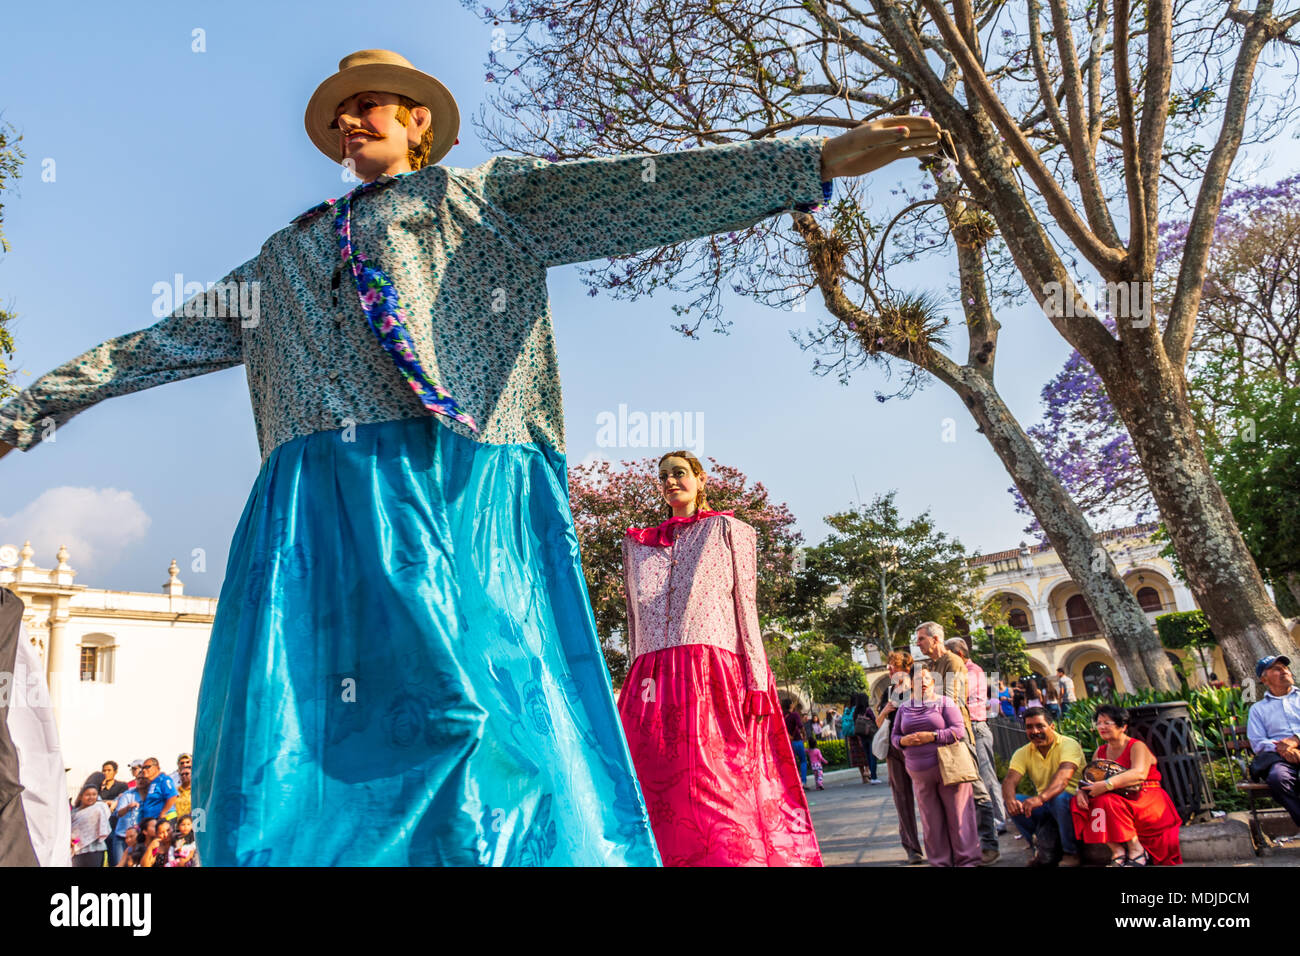 Antigua, Guatemala -  March 9, 2018: Dance of traditional giant folk dancing puppets called gigantes in central plaza in front of cathedral Stock Photo